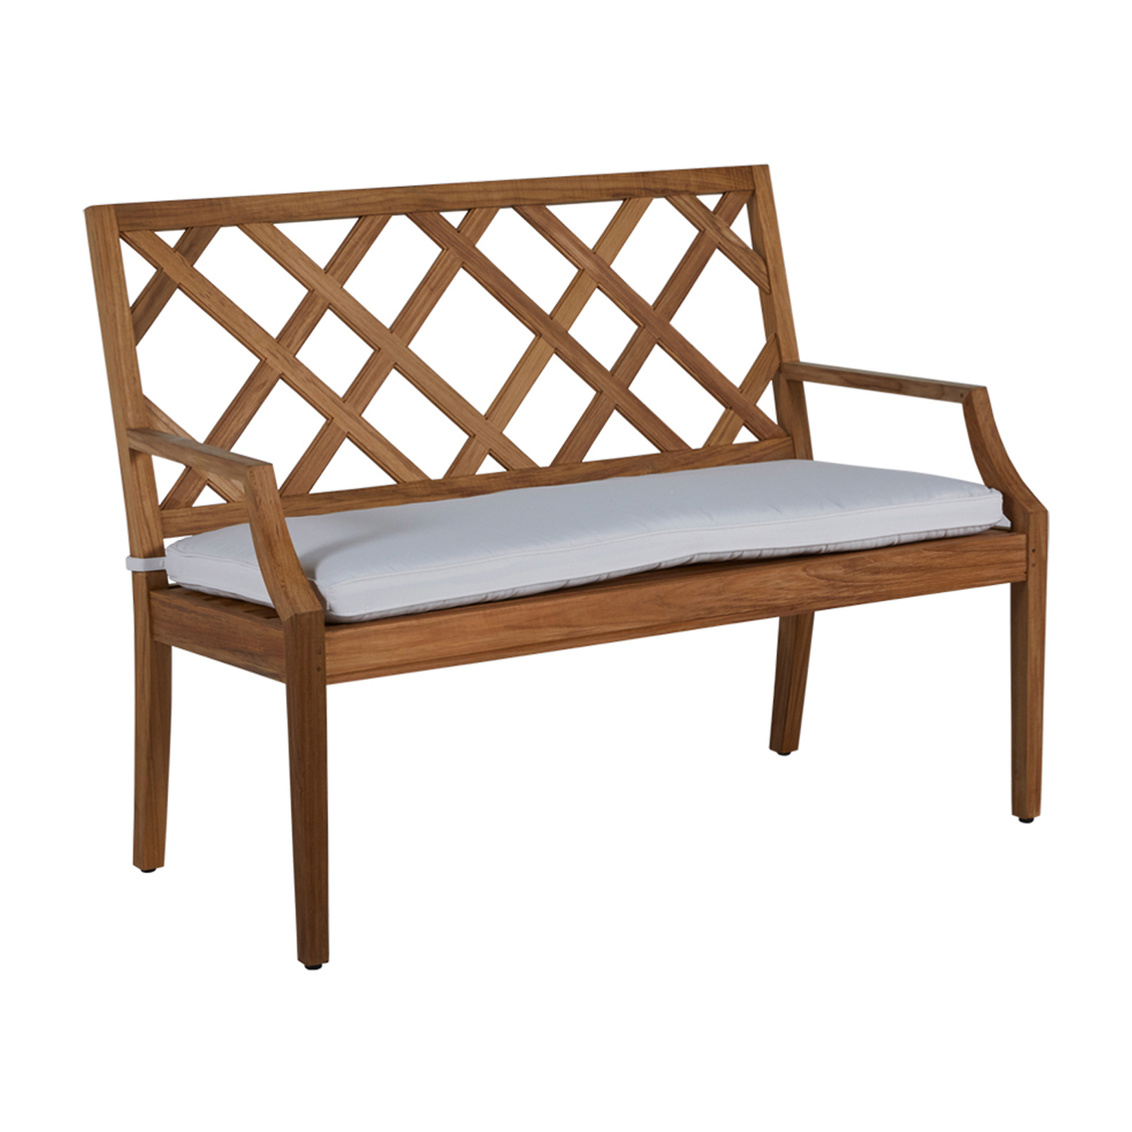 haley 48 inch bench in natural teak – frame only product image